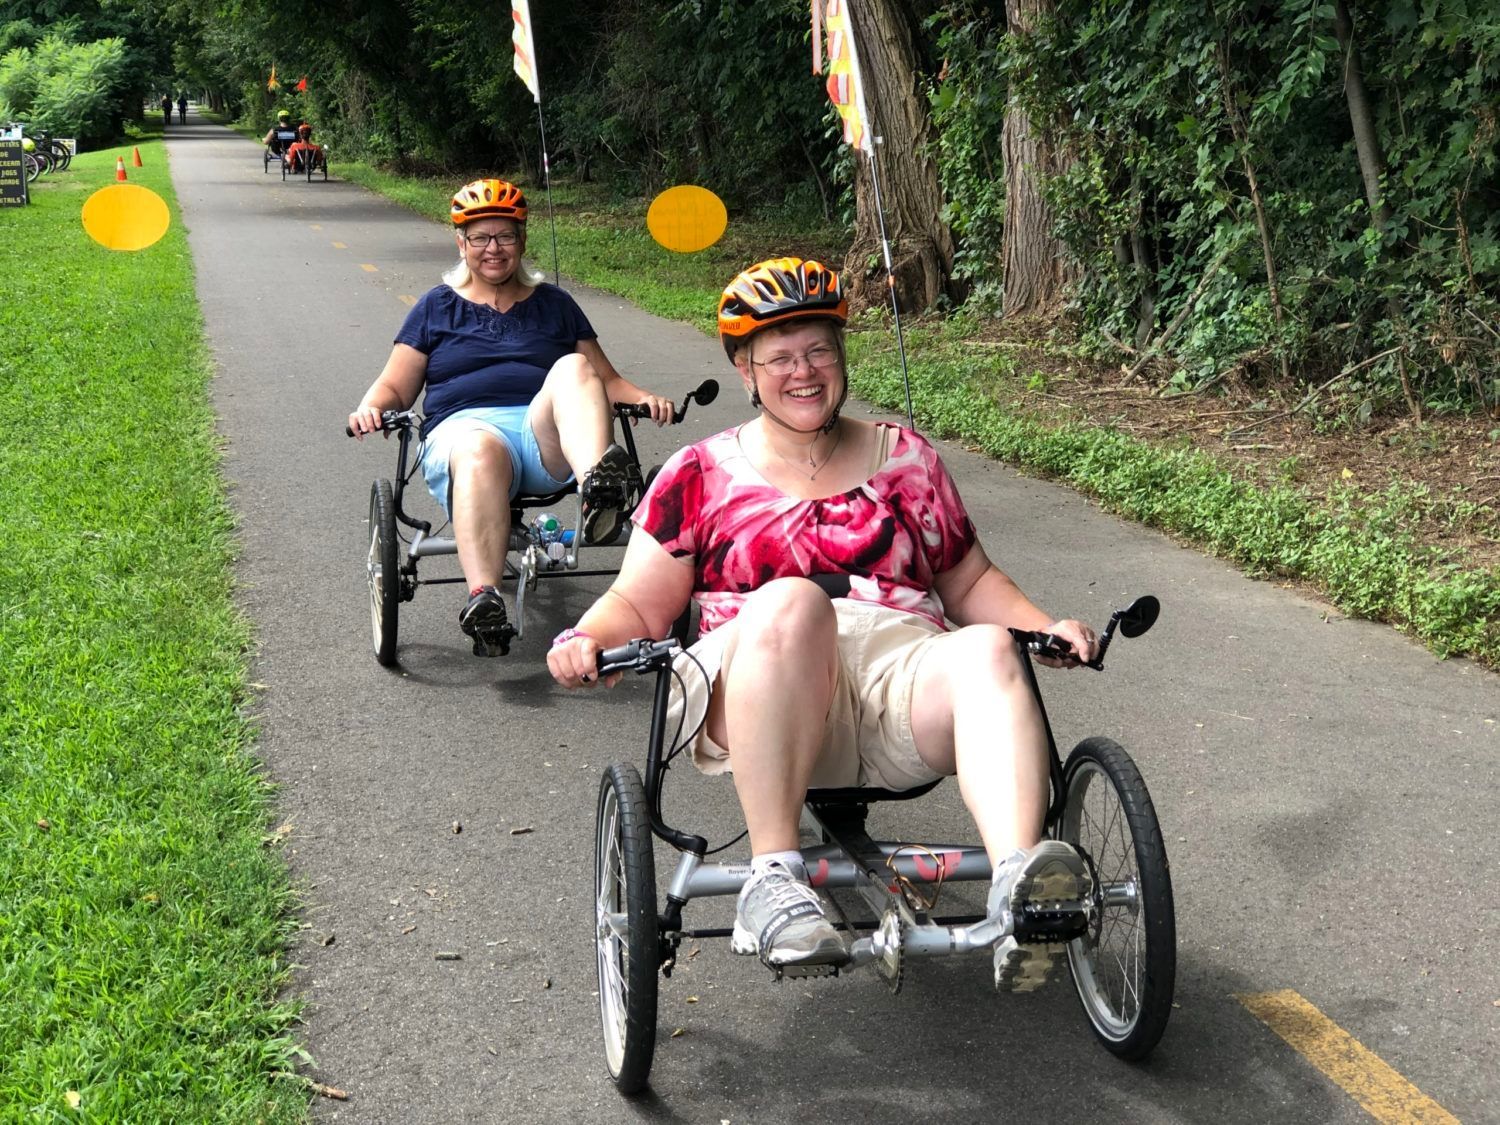 Two women in helmets smile as they ride recumbent tricycles on a bike path.